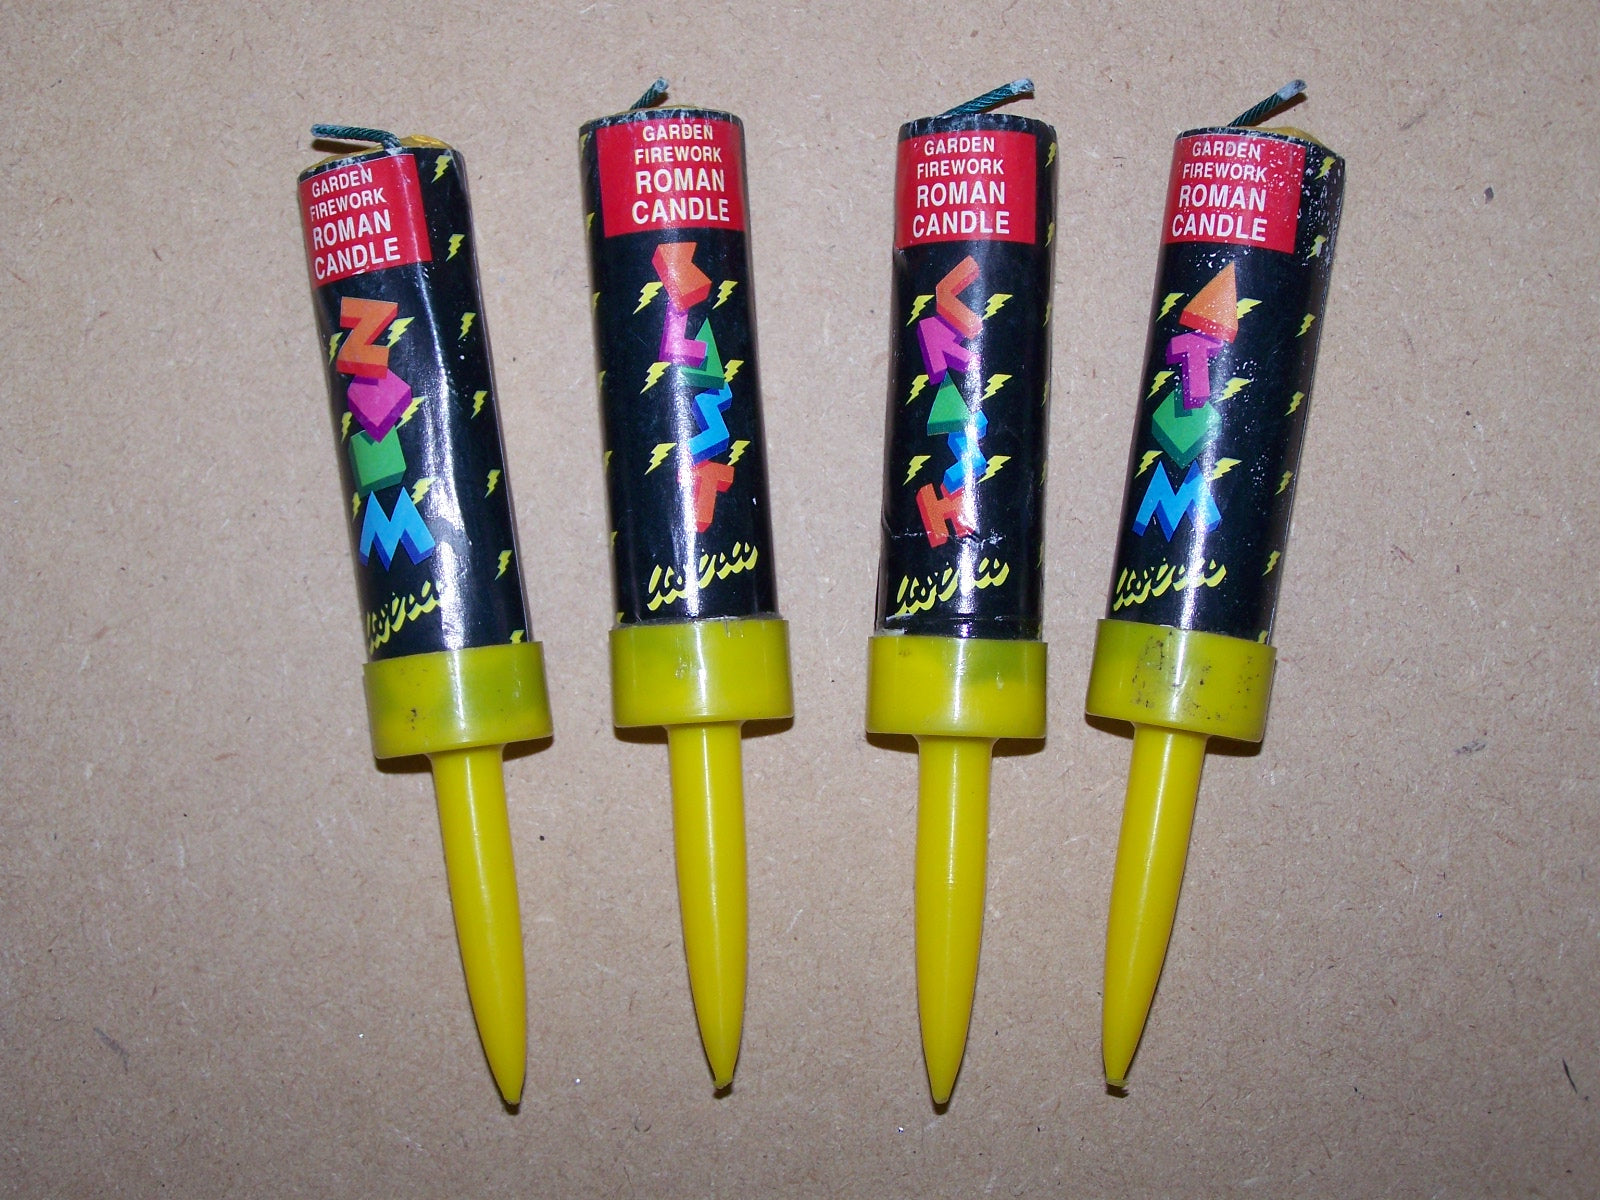 Science of Fireworks - Roman Candles